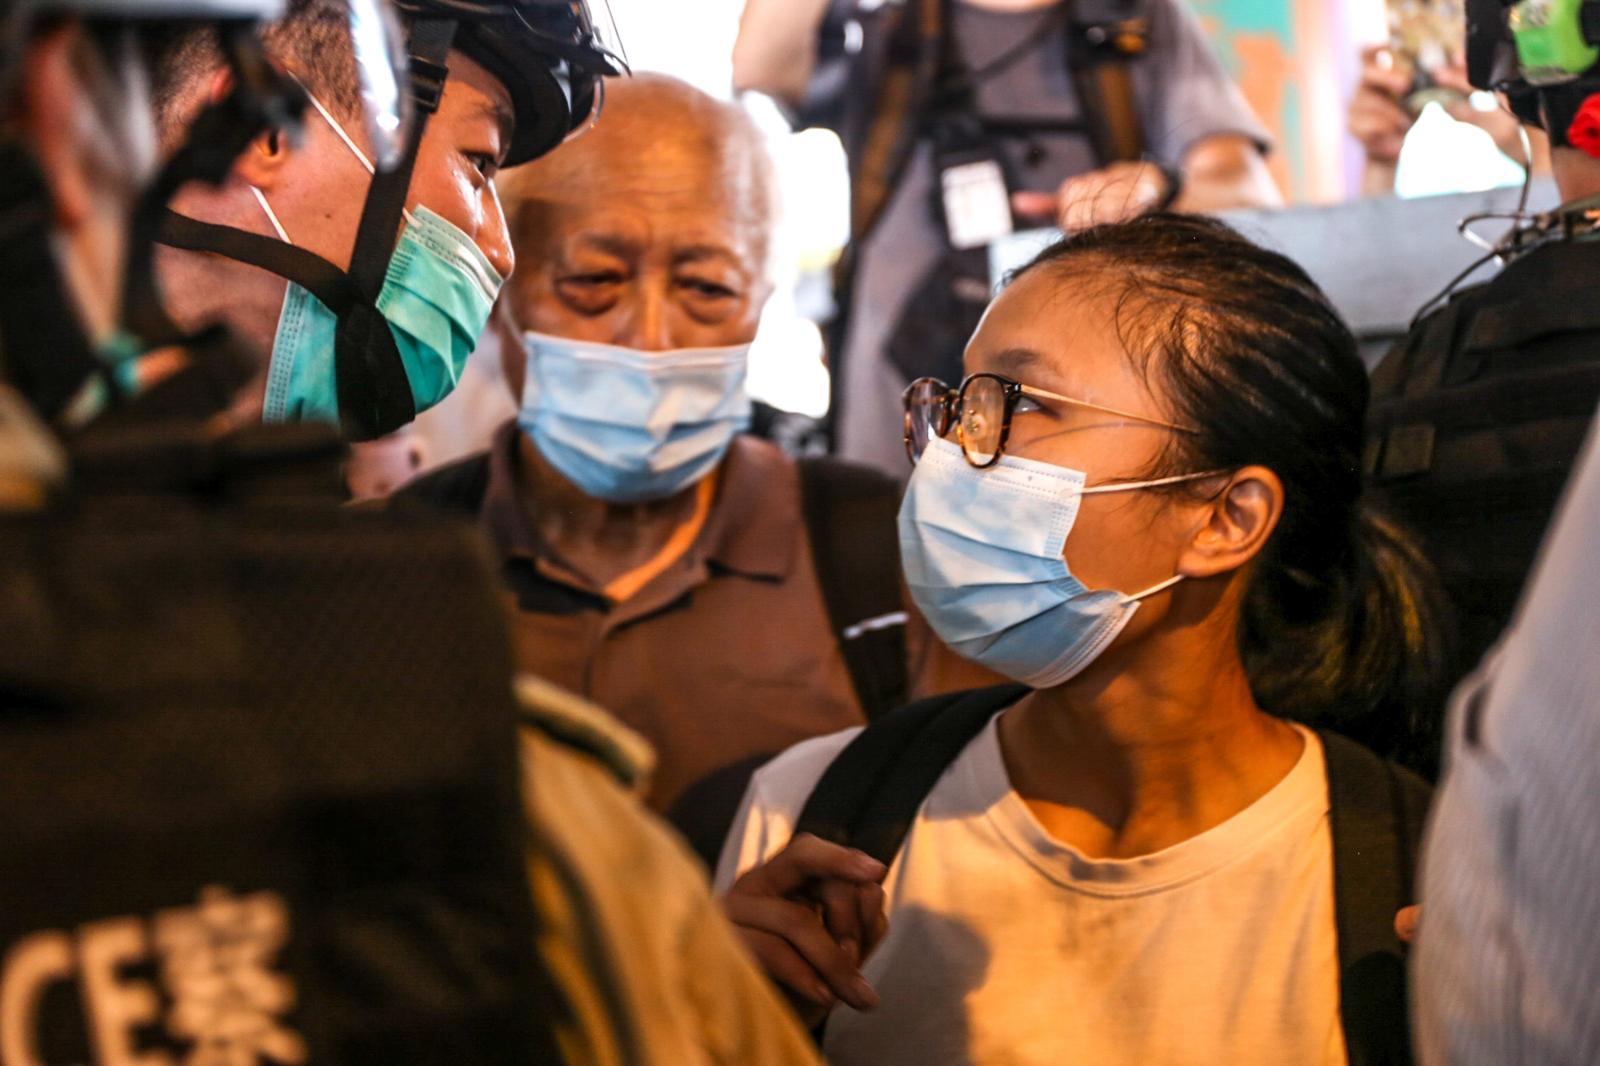 [2019-2021] Hong Kong Protests: Behind the Front Lines - On the first day of the National Security Law, a young...